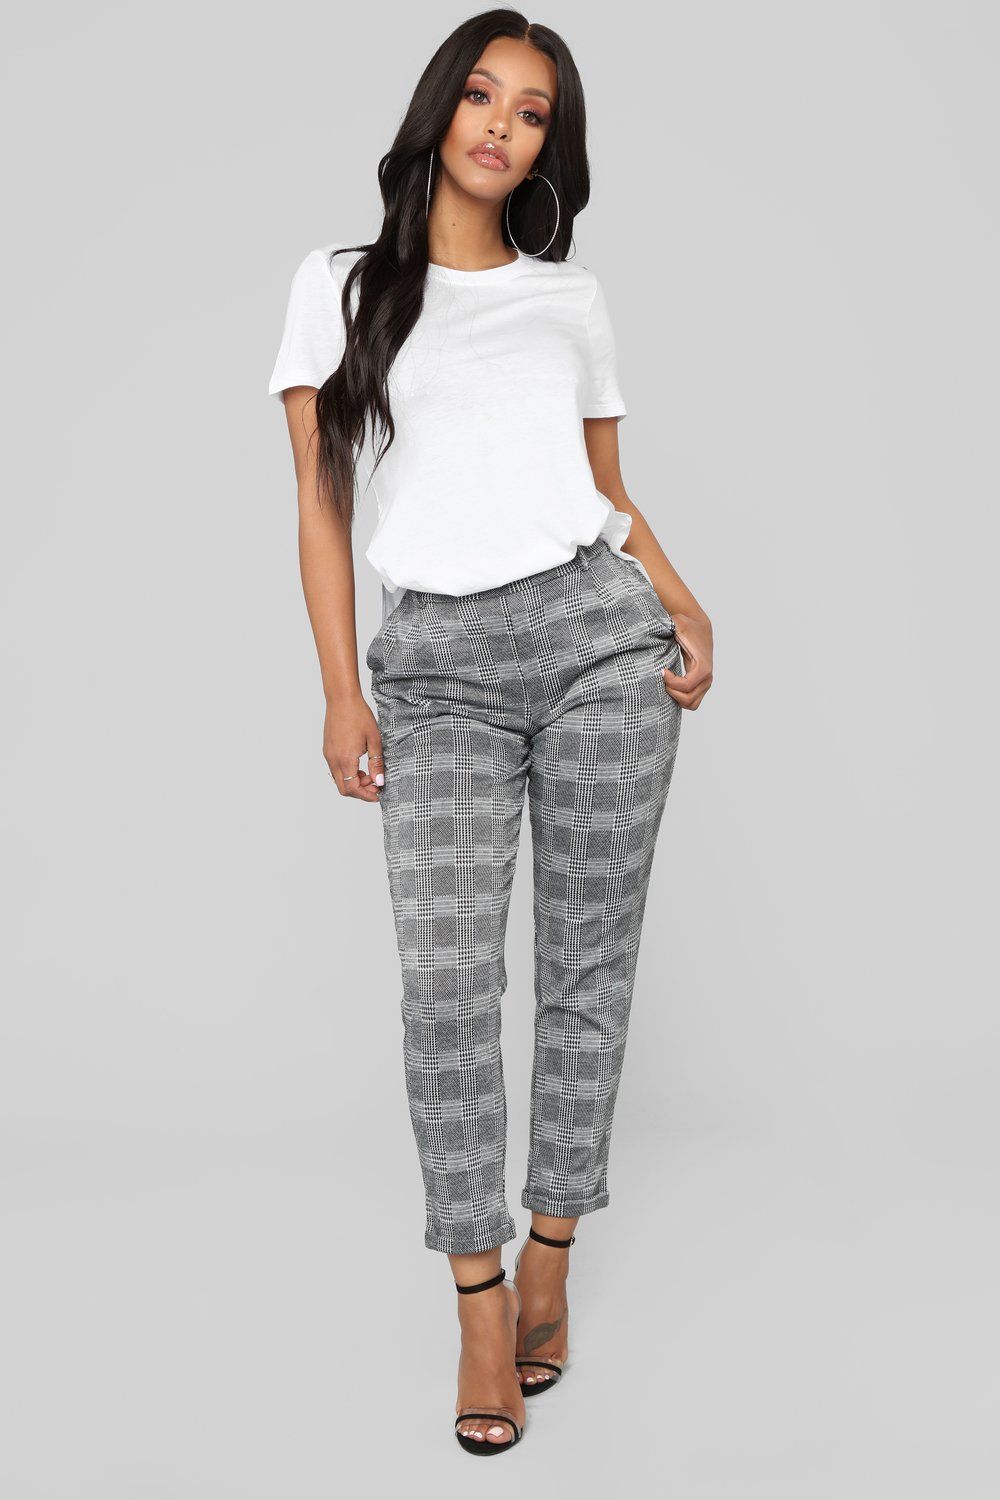 How To Style Black White Plaid Pants